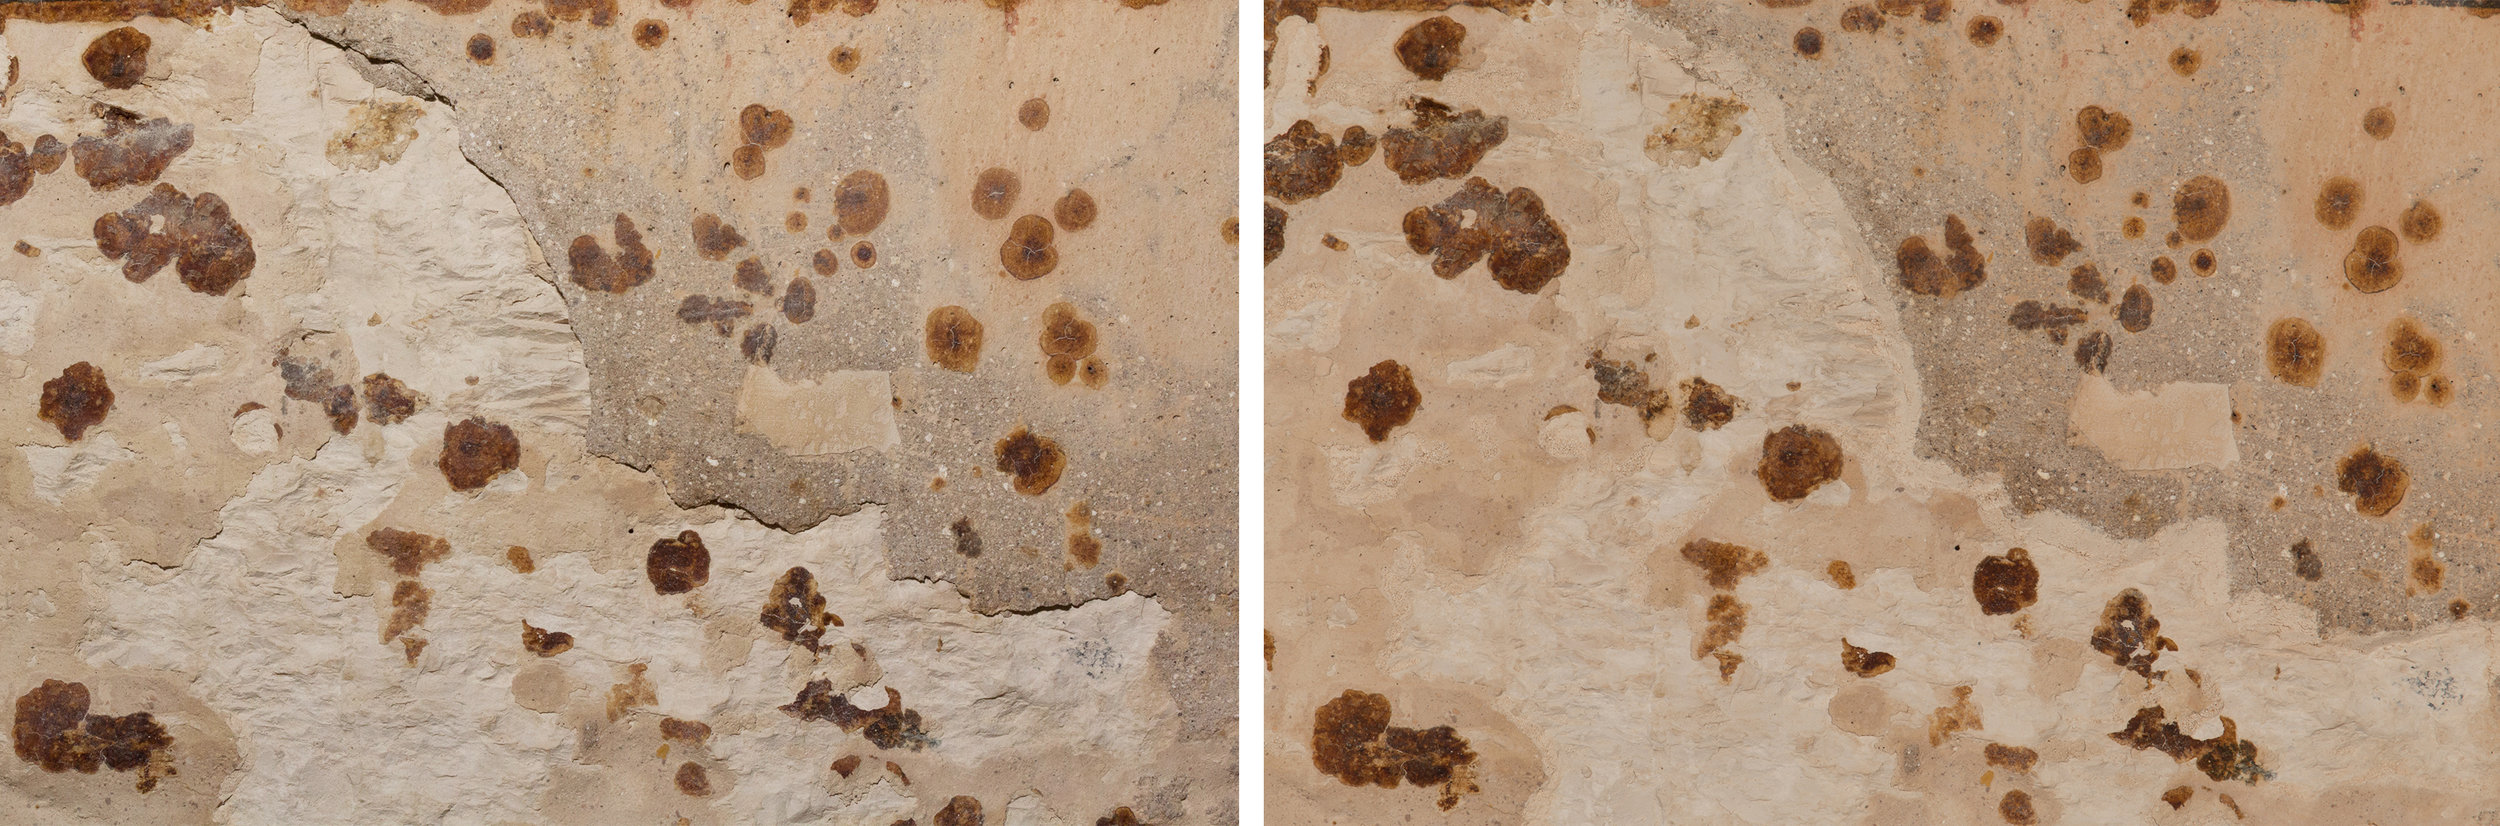  Area of original plaster shown before (left) and after (right)&nbsp;stabilization with an edge repair.&nbsp;  Image © J. Paul Getty Trust, 2017 